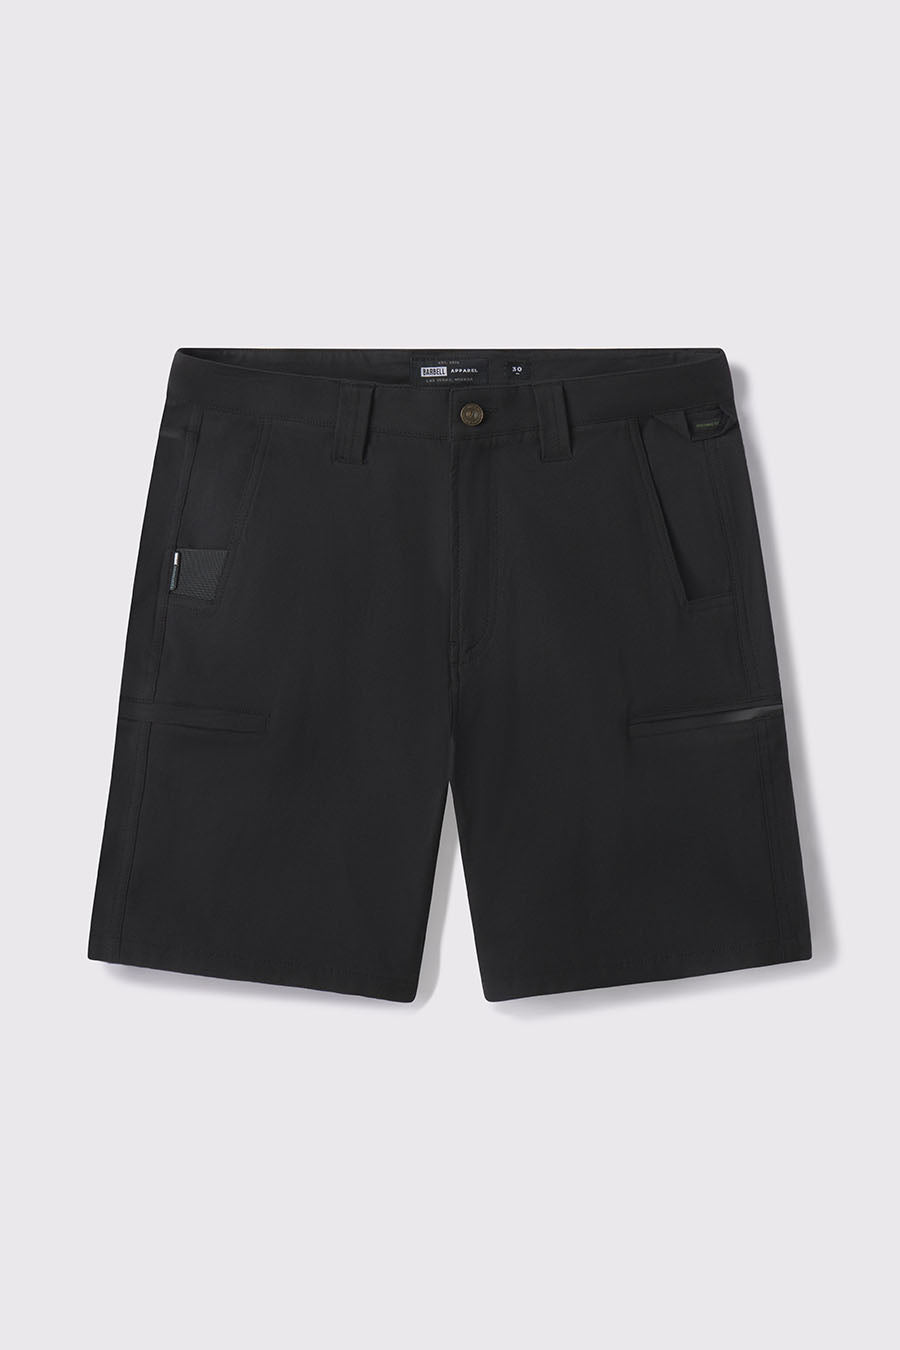 Covert Short - Black - photo from front flat lay #color_black